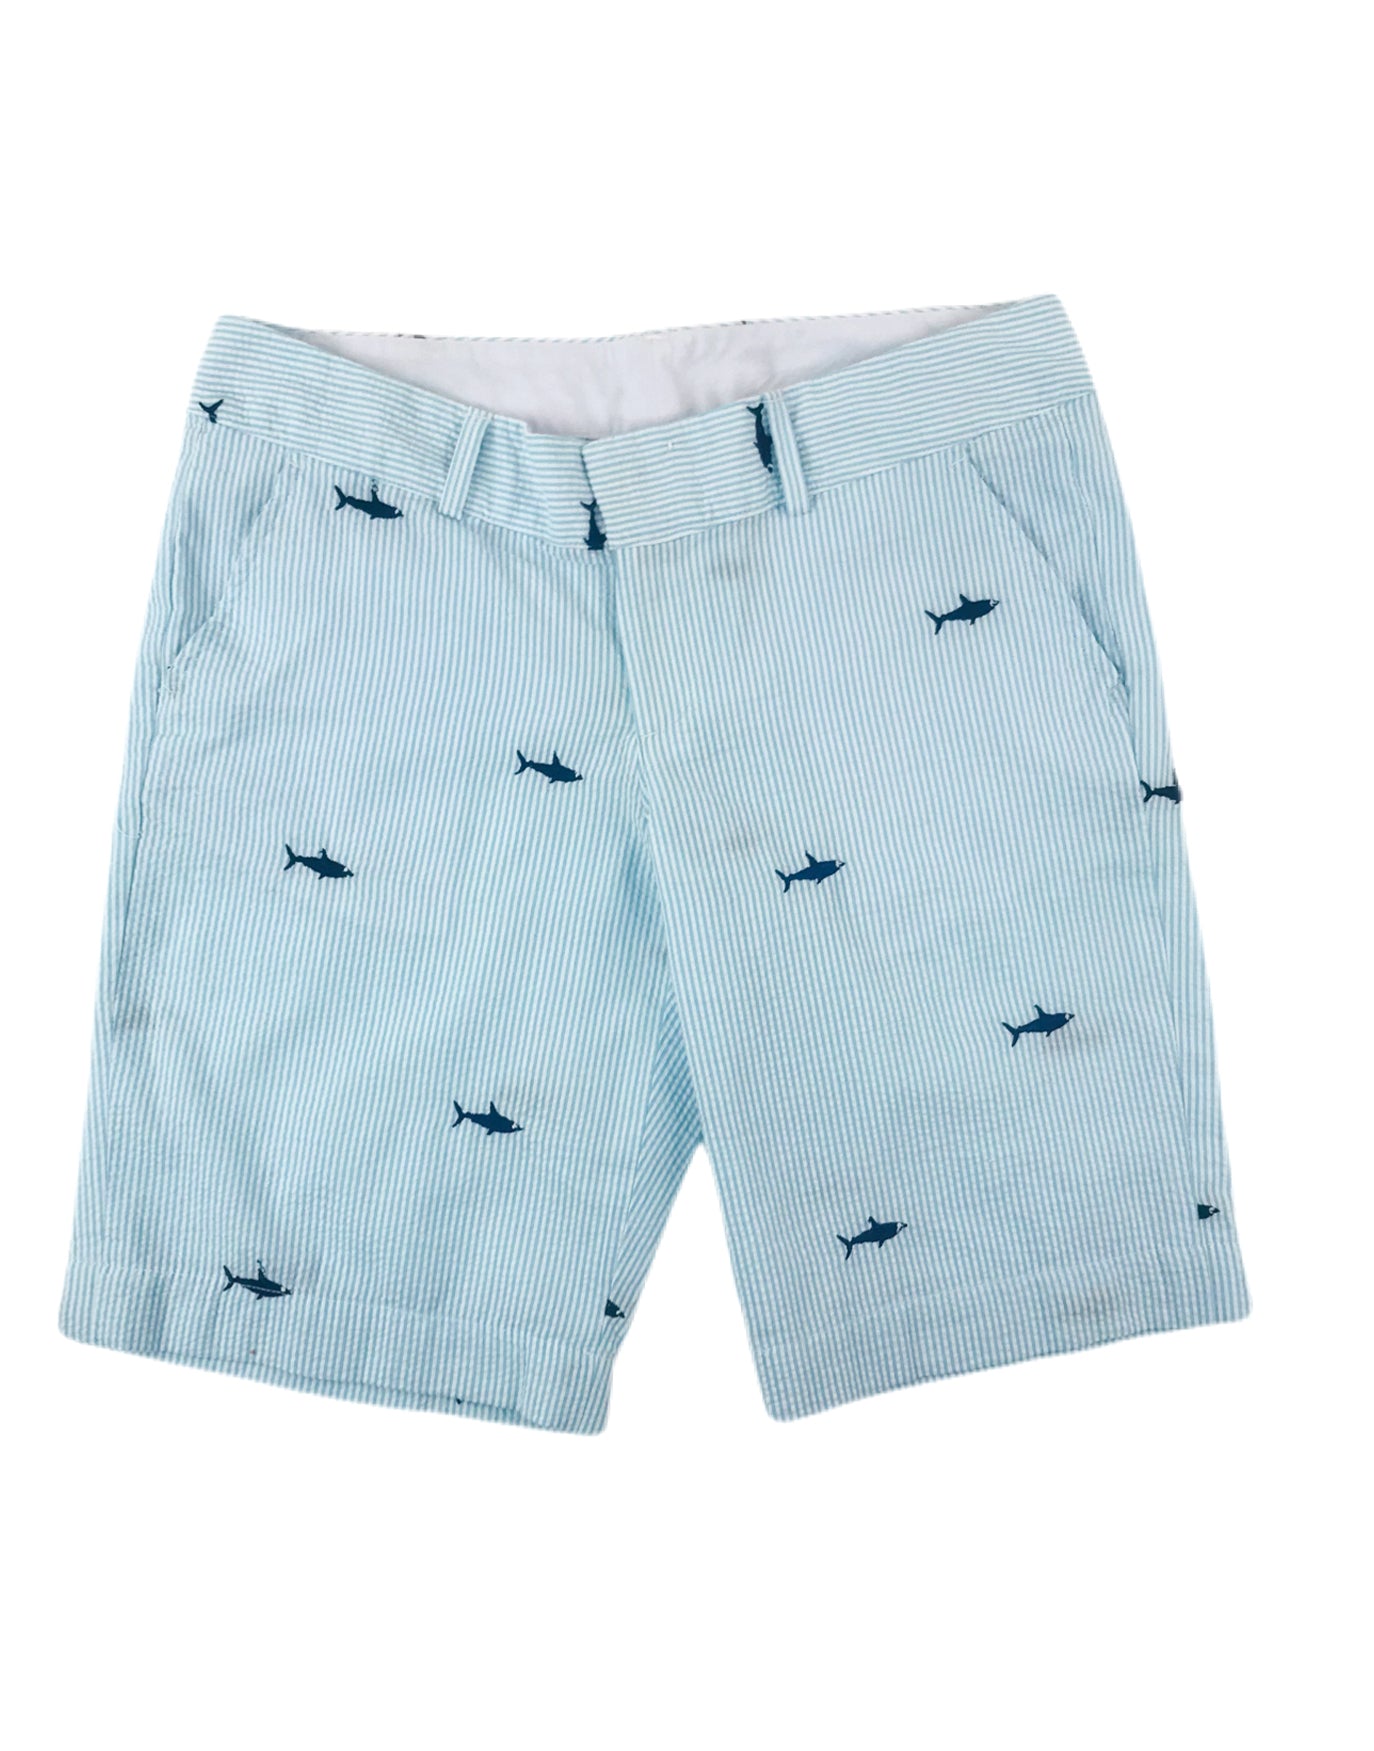 Turquoise and White Seersucker Women's Bermuda Shorts with Navy Embroidered Sharks